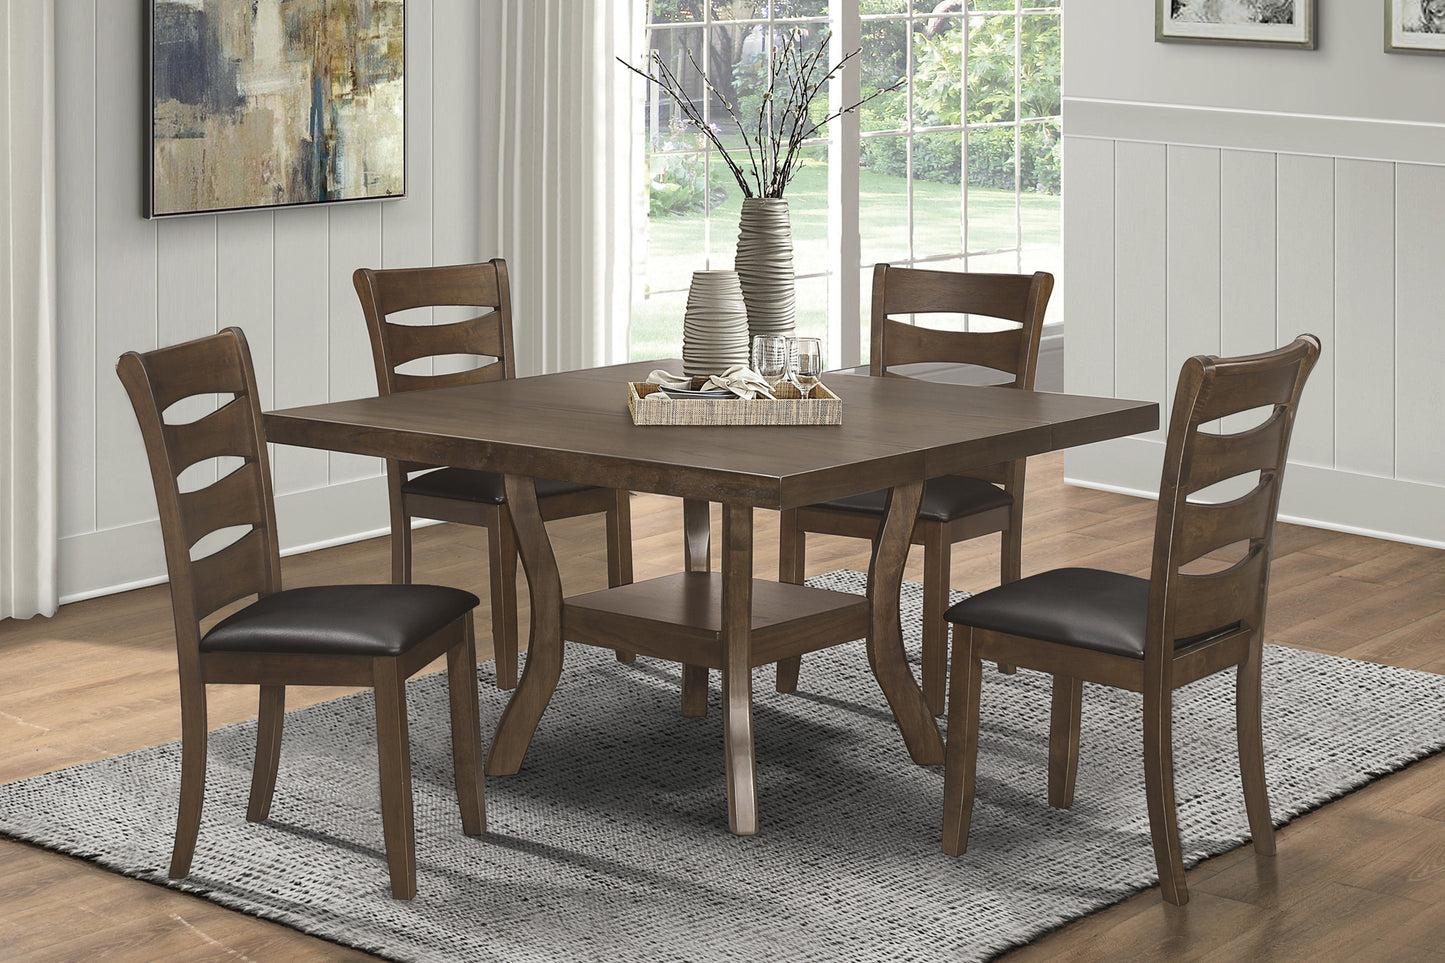 Transitional Brown Finish Dining Table with Lower Display Shelf and Extension Leaf Mindy Veneer Wood Dining Room Furniture